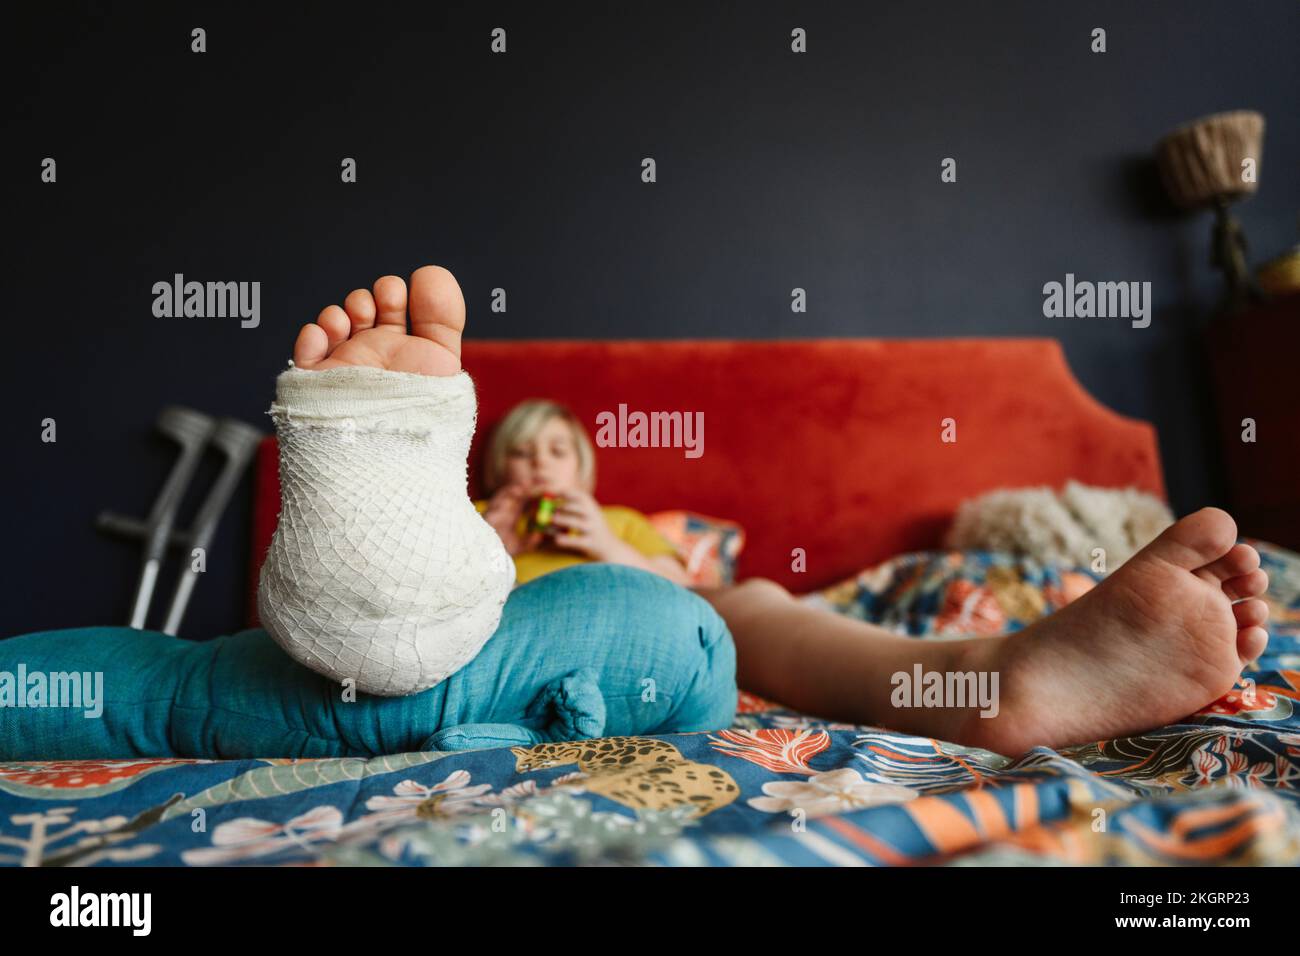 Boy with plaster cast on leg resting on bed at home Stock Photo